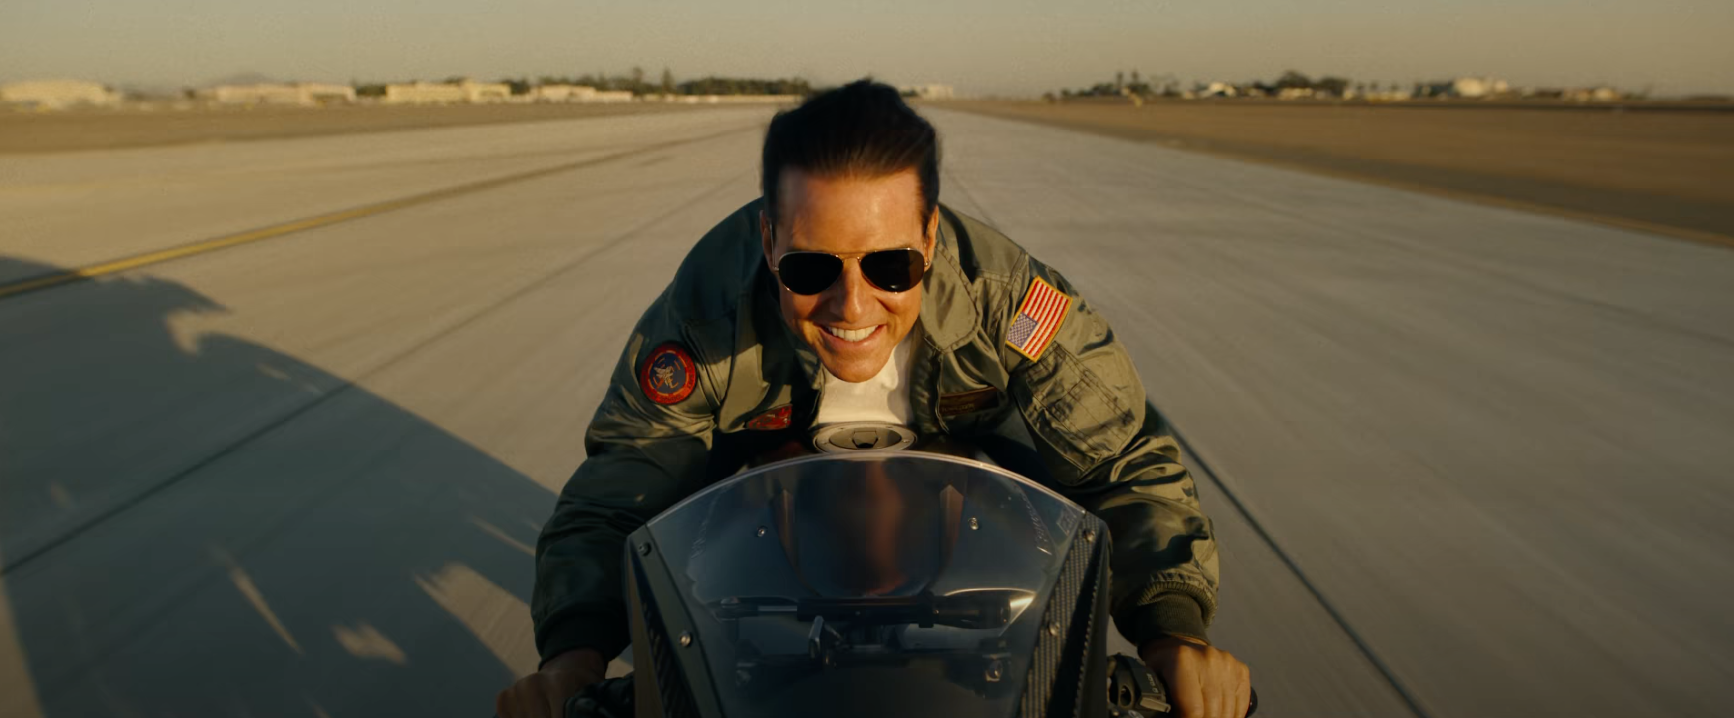 Watch the New ‘Top Gun’ Trailer—Then Learn About the Real Topgun Phenomenon